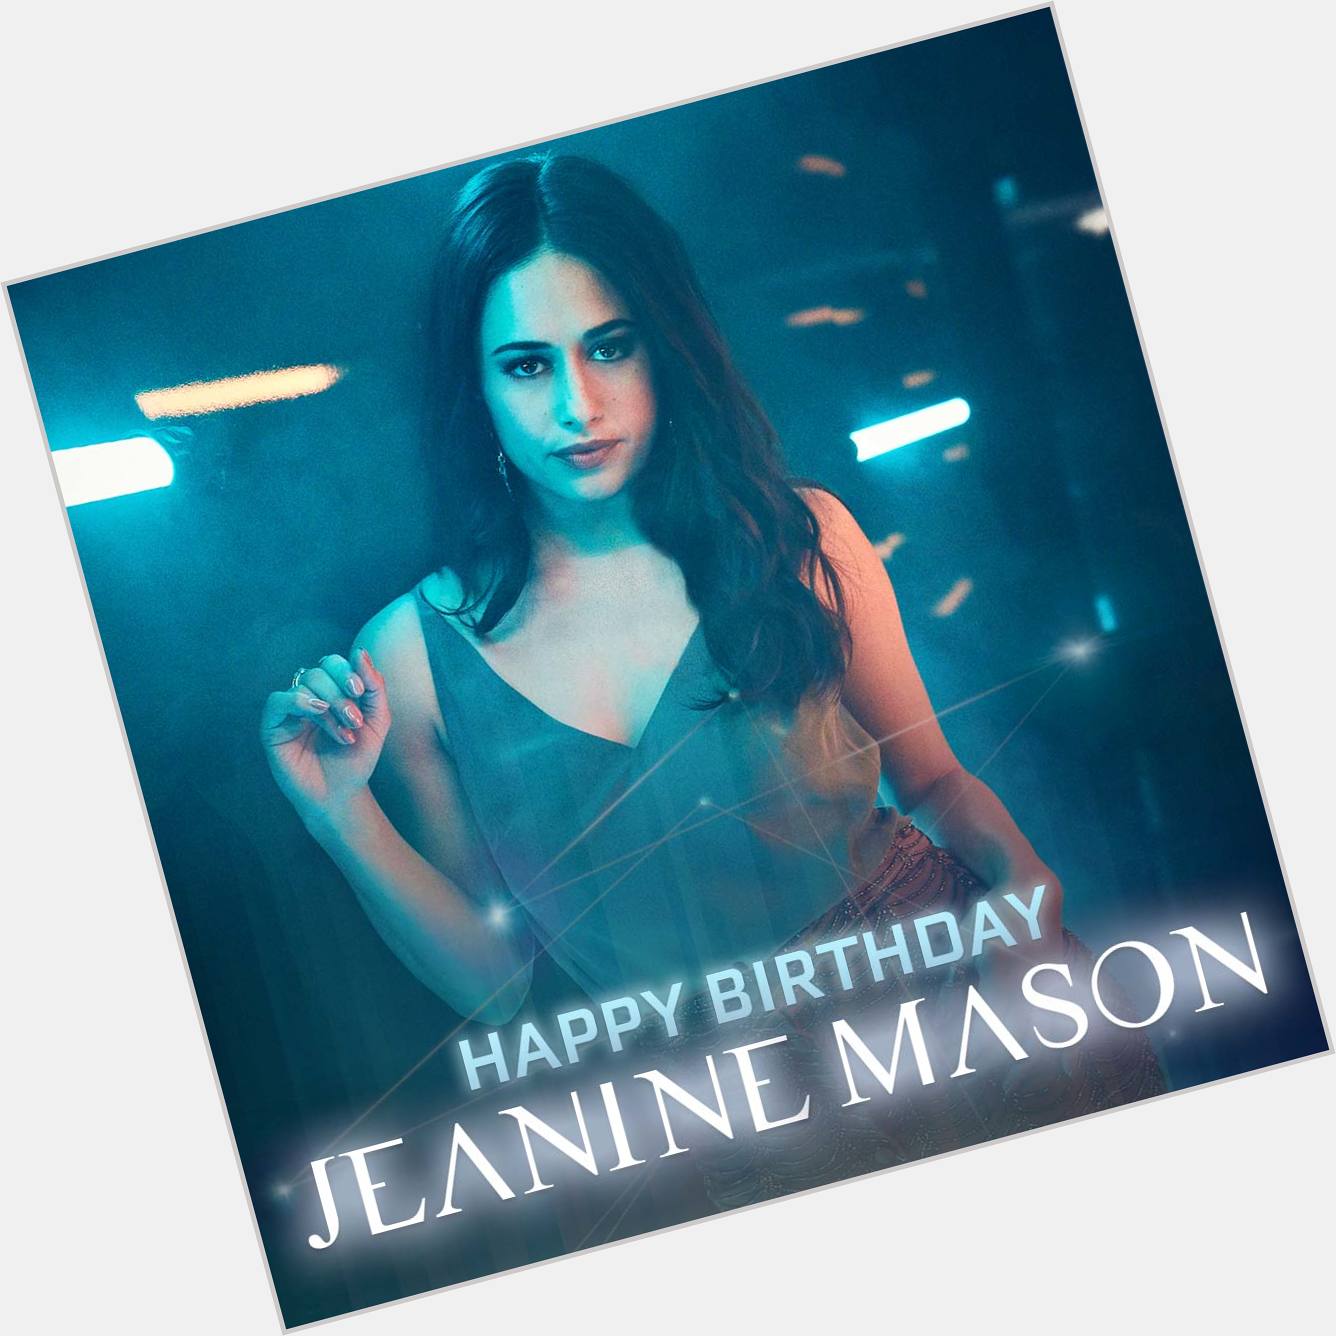 Hope today is out of this world! Happy Birthday, Jeanine Mason! 